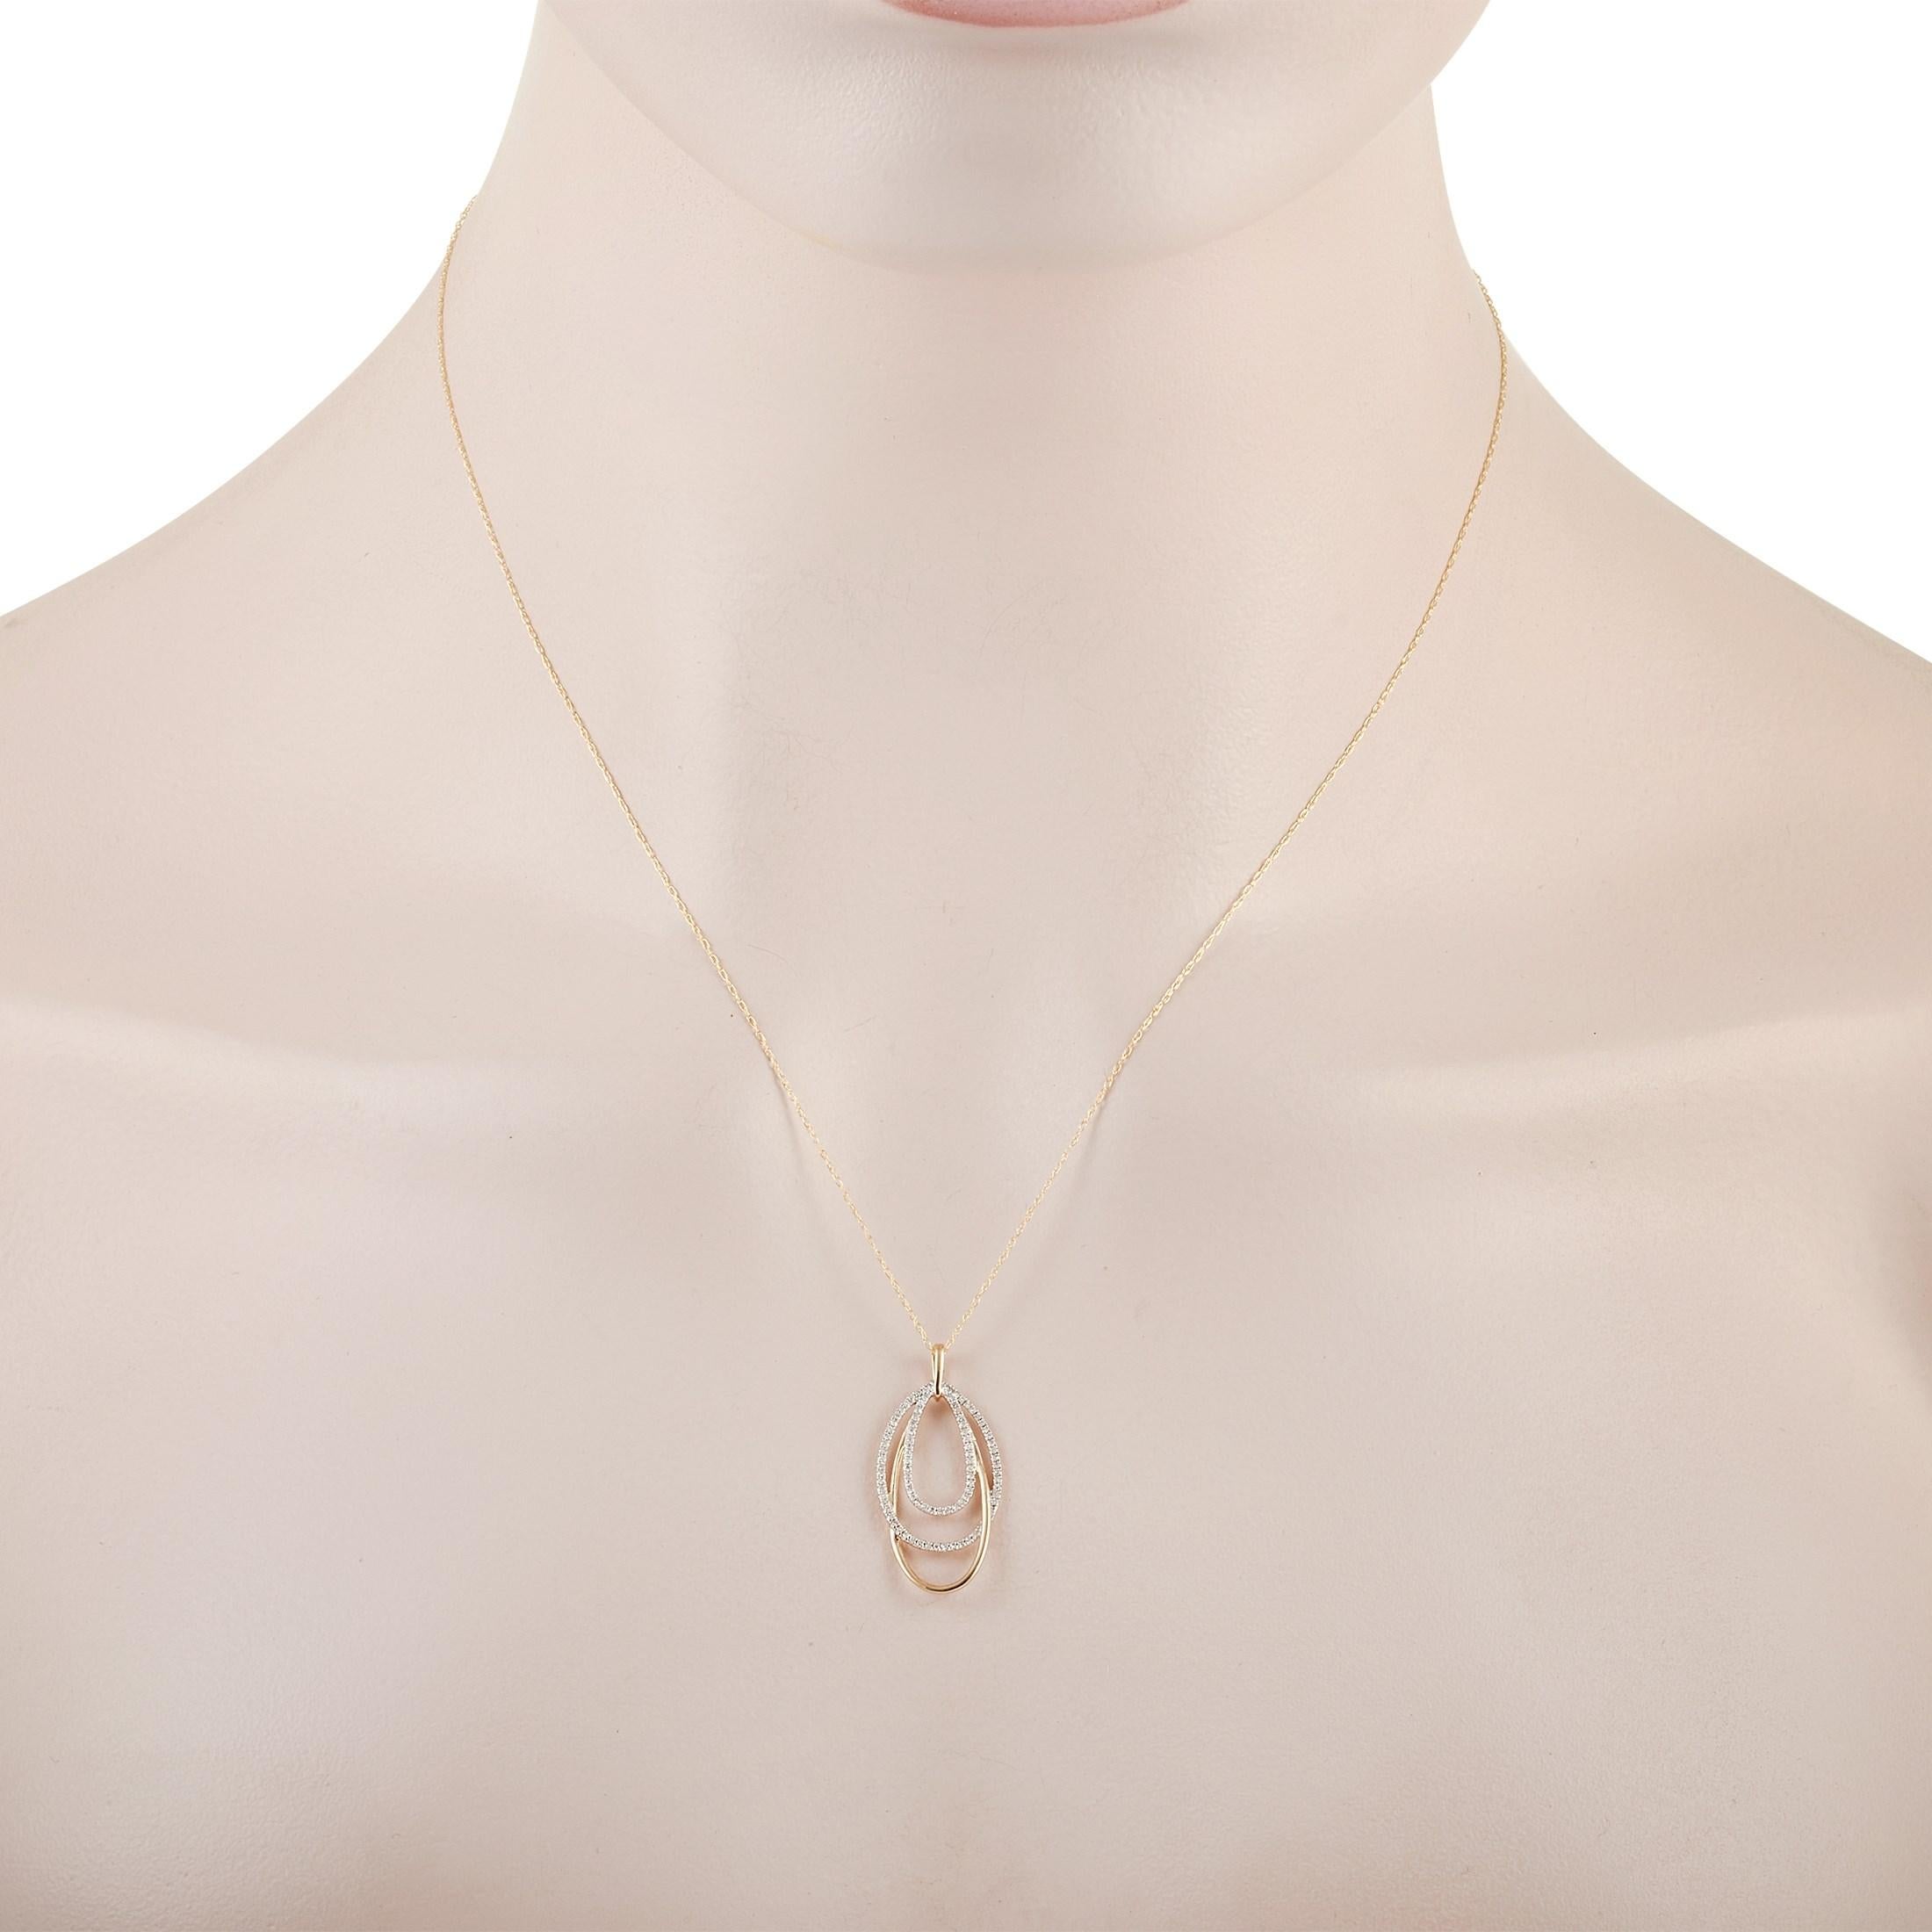 The LB Exclusive 14K Yellow Gold 0.17 ct Diamond Layered Oval Pendant Necklace features a delicate 14K Yellow Gold chain that is 17 inches in length and includes a yellow gold triple oval pendant set with 0.17 carats of round cut diamonds. The